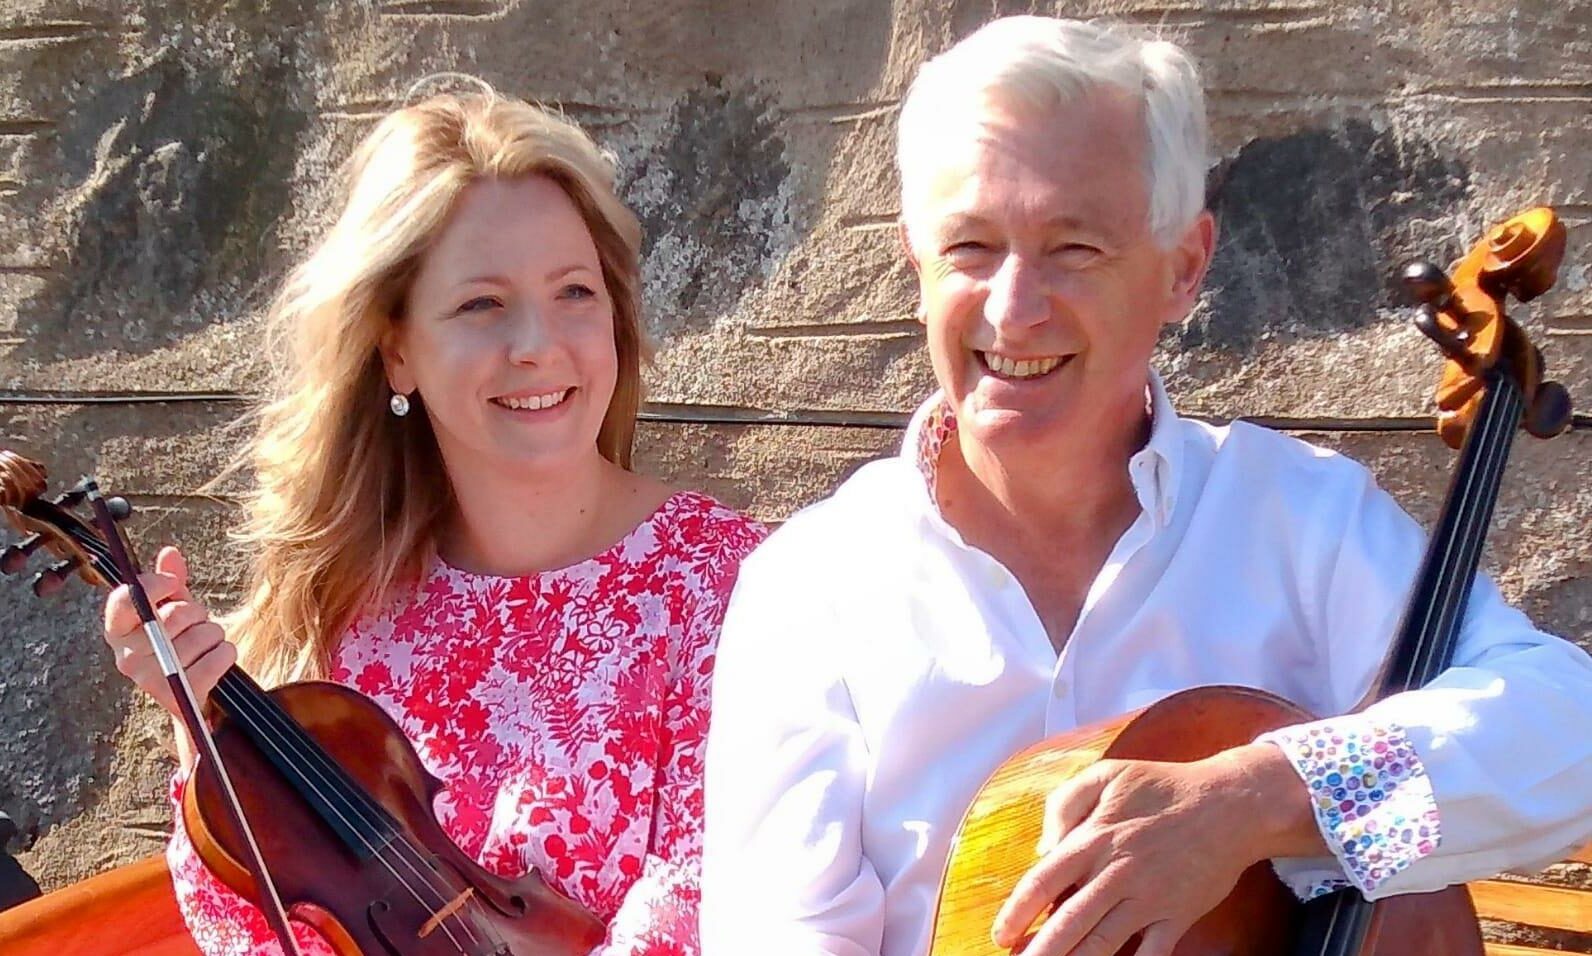 A concert to support those affected by the Ukrainian conflict has been organised in Fraserburgh. Pictured are organisers, Nataliia Naismith and Gareth John, conductor for the Aberdeen City Orchestra. Supplied by Nataliia Naismith.